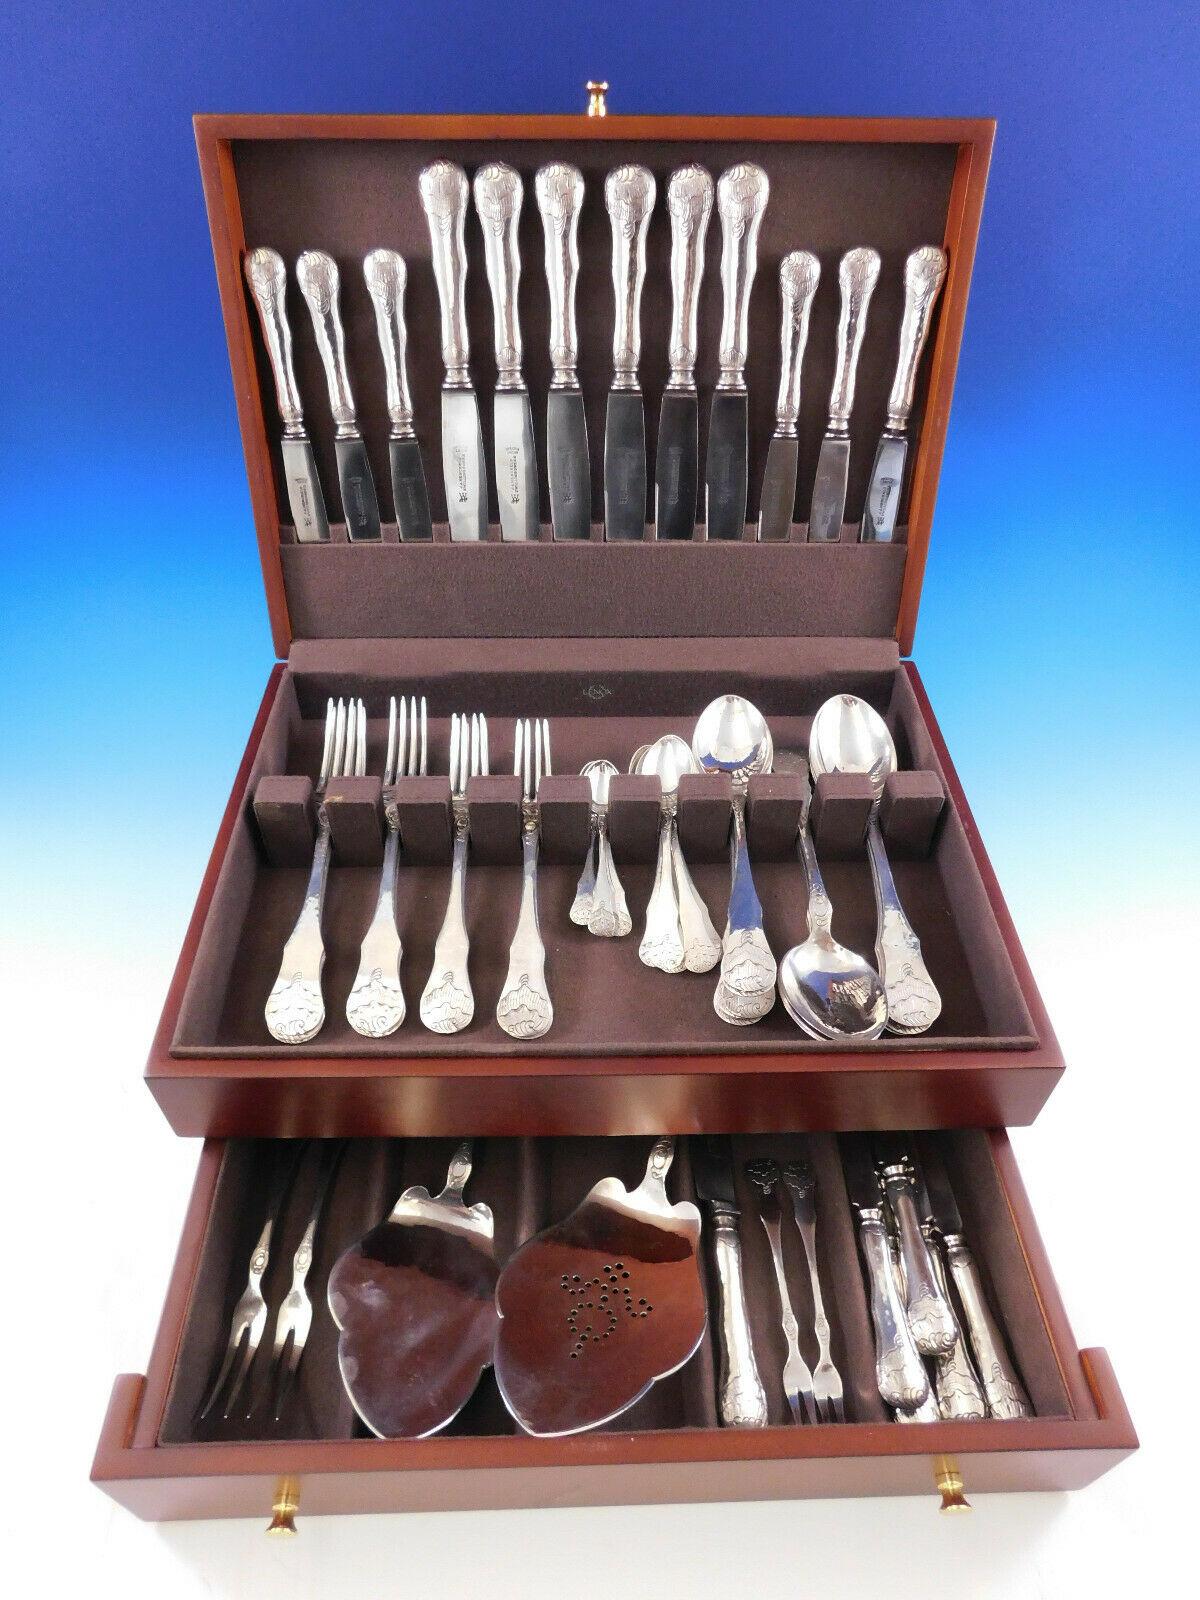 Rare Norrona circa 1920 by David Andersen .830 Danish silver Flatware set, 60 pieces. The pieces are hand hammered with a design of a chased shell. 
This set includes:

6 large dinner knives, 9 3/4